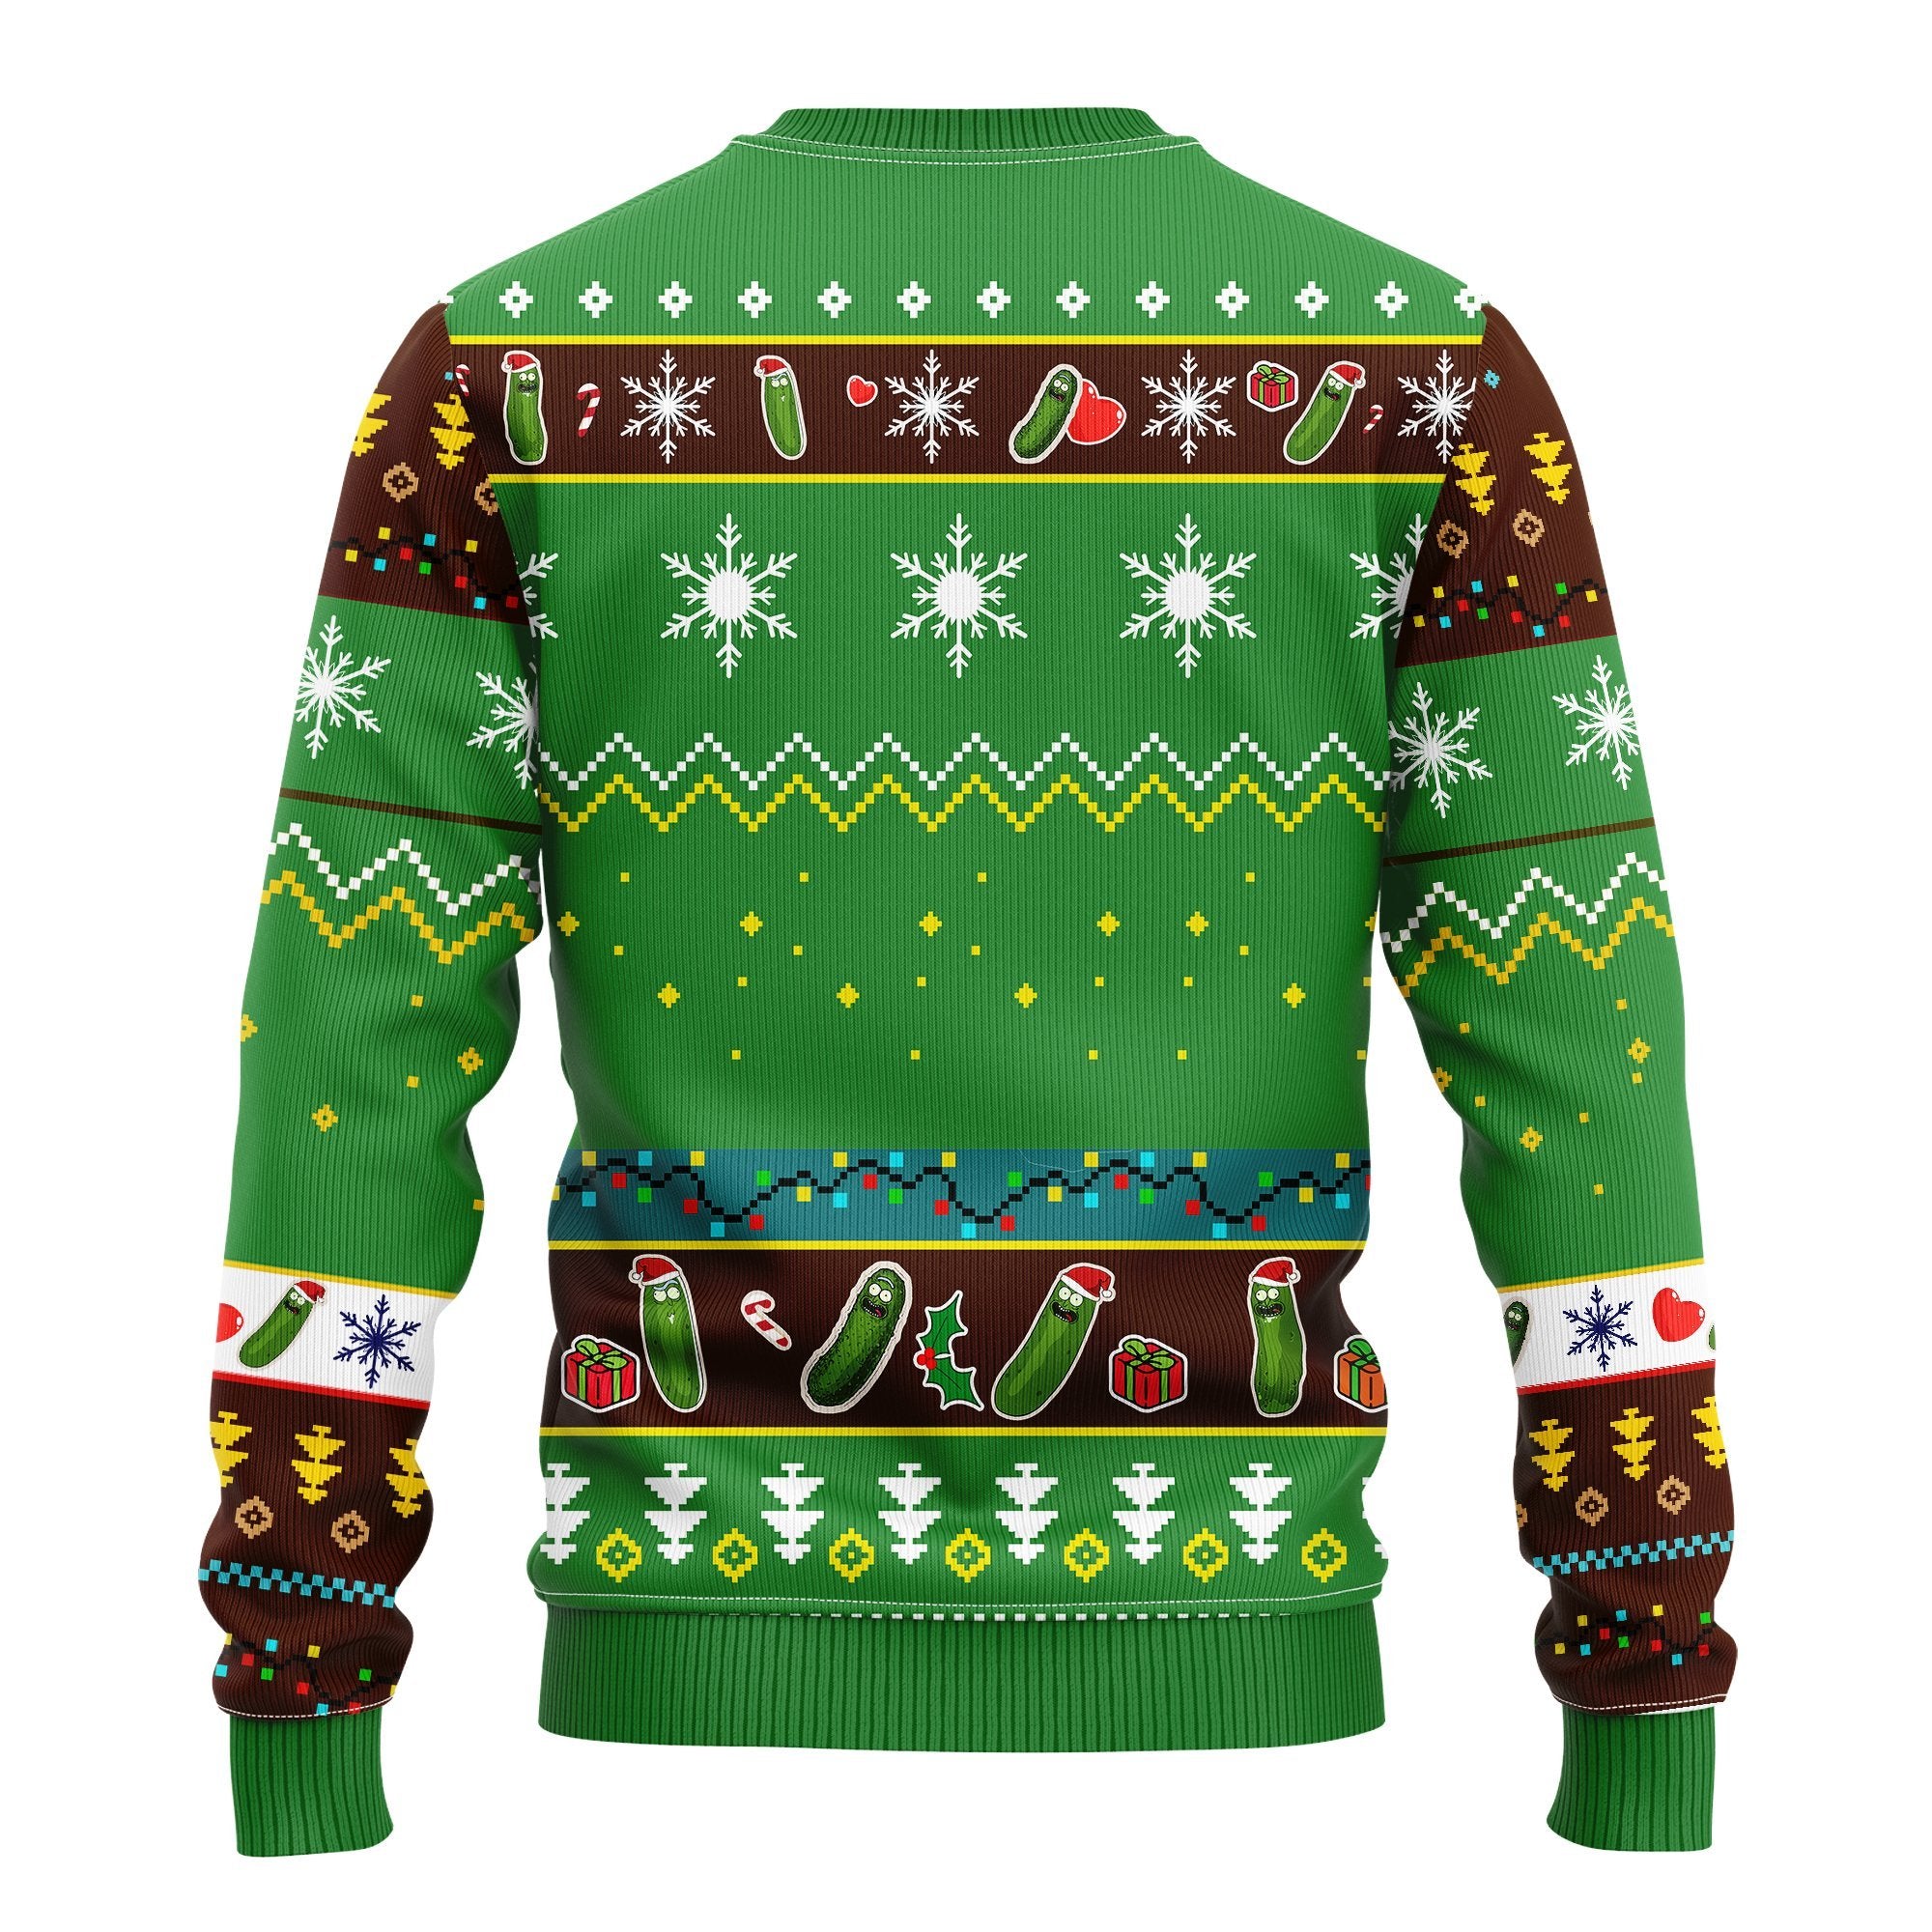 Pickle Rick Rick And Morty Ugly Christmas Sweater Green 1 Amazing Gift Idea Thanksgiving Gift